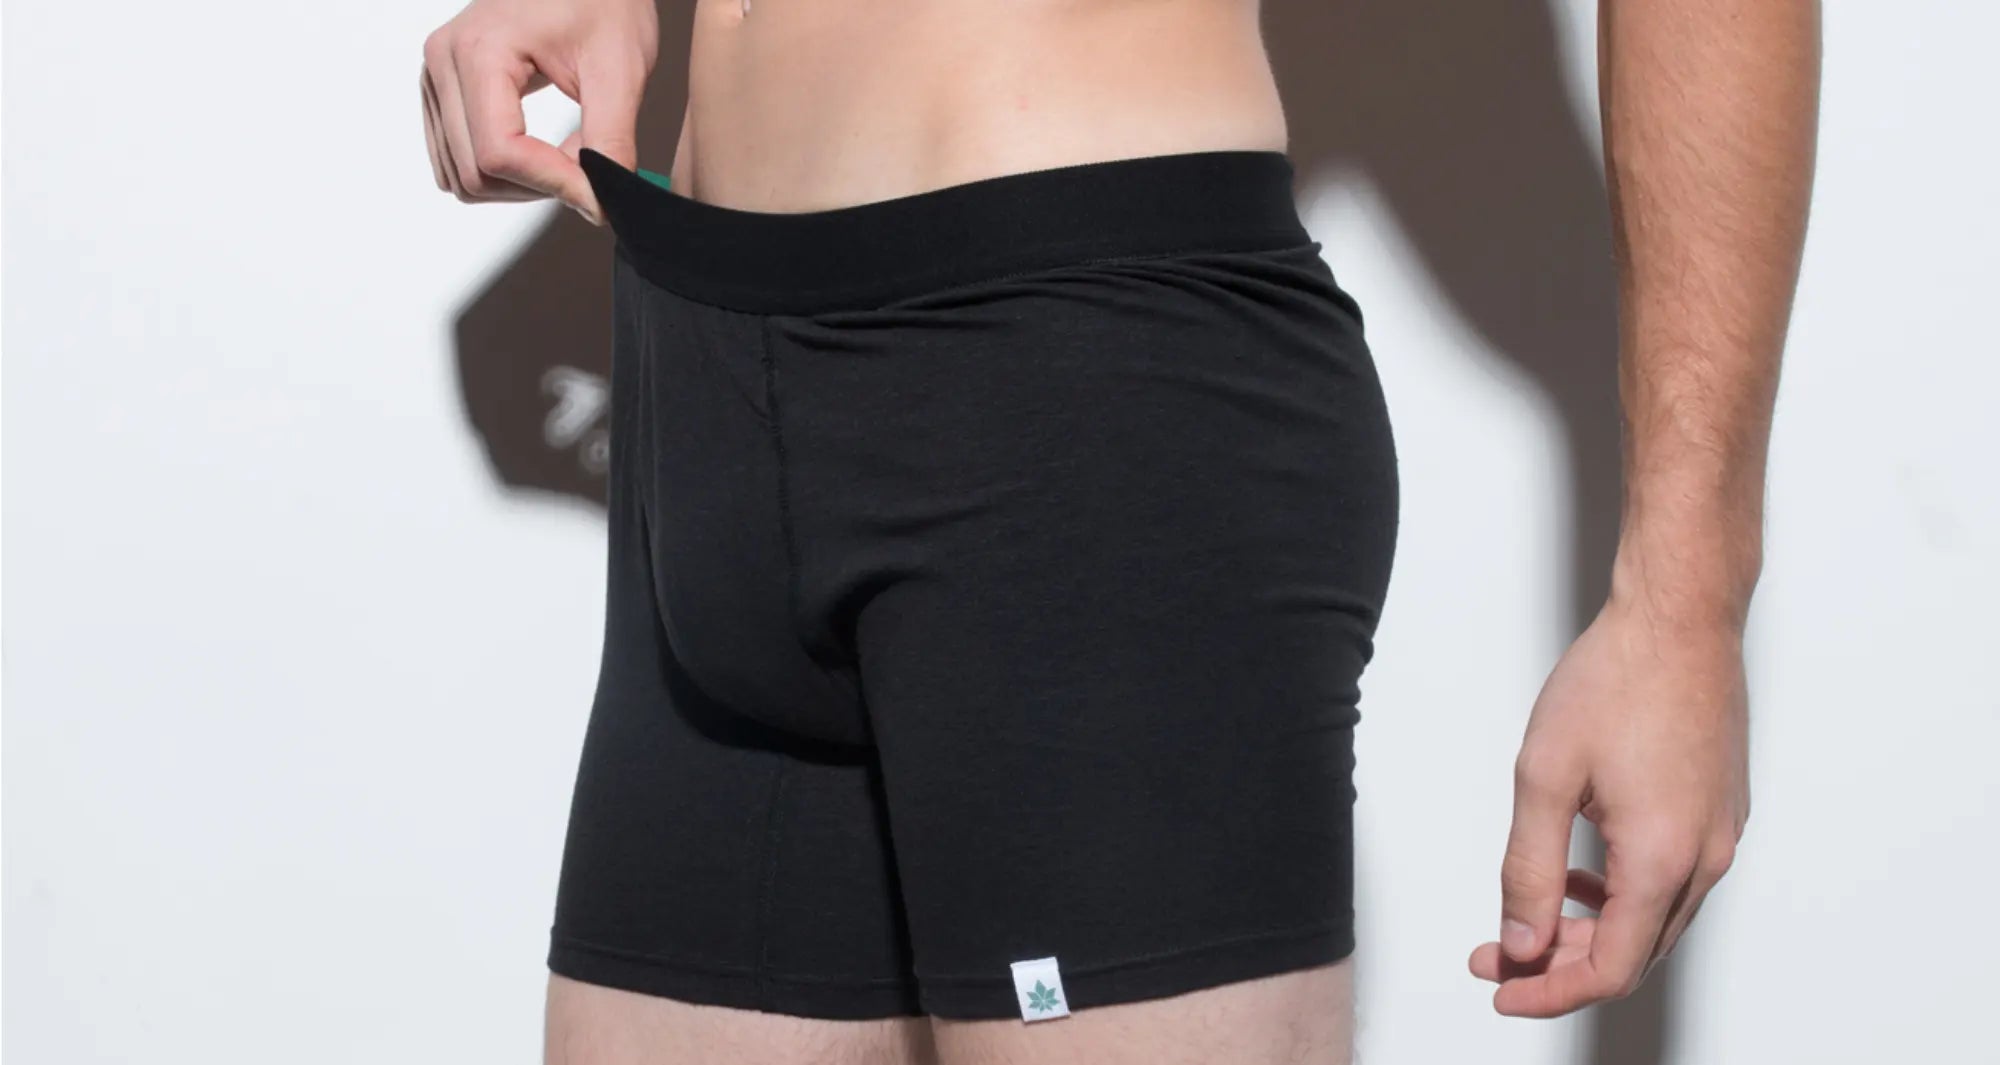 Boxer Briefs that Don't Ride Up: Is it possible?